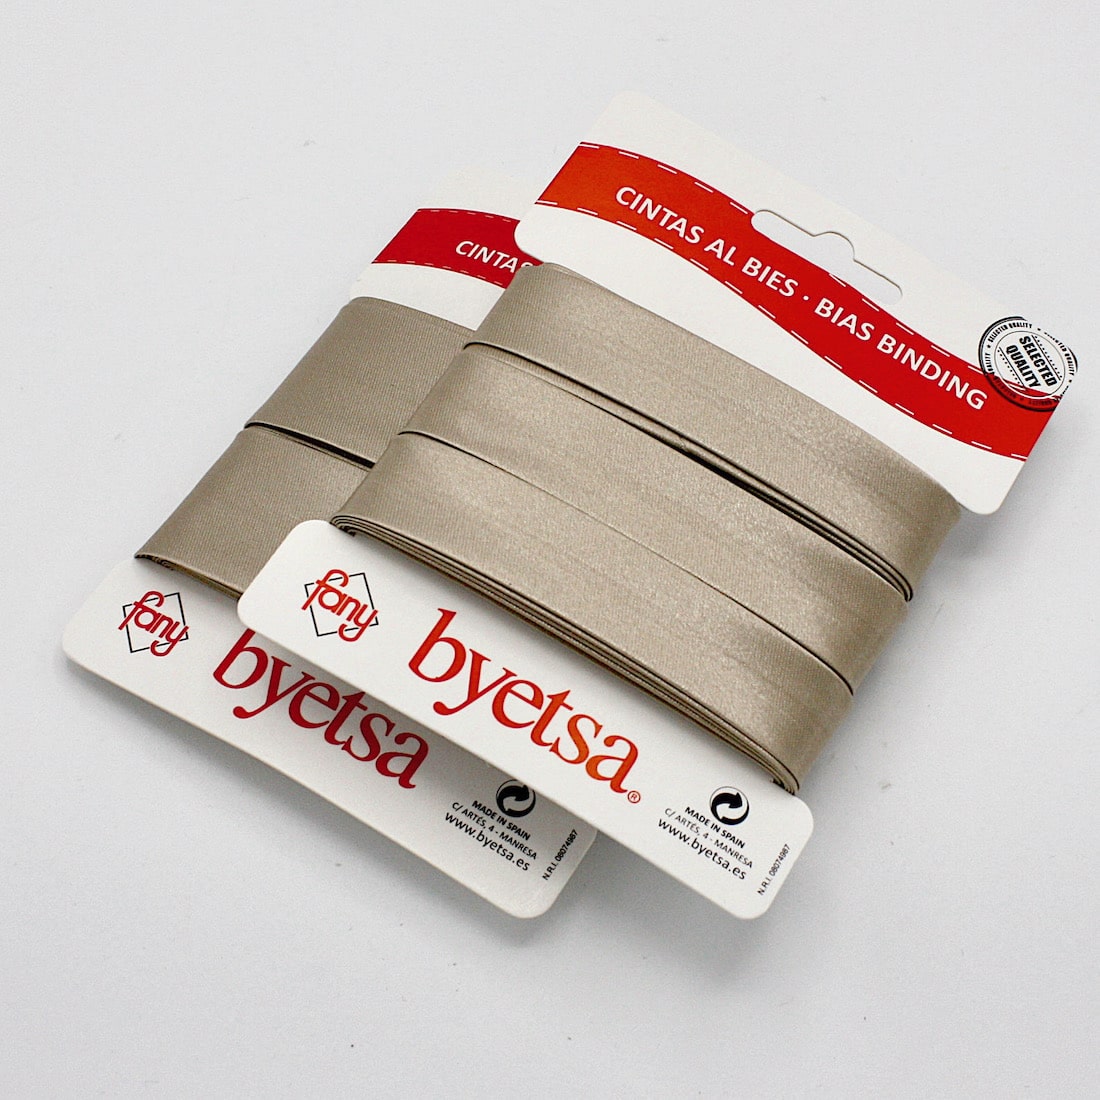 5 metres of Pre-packed Satin Bias Binding Tape in 18mm and 30mm width in Champagne 240